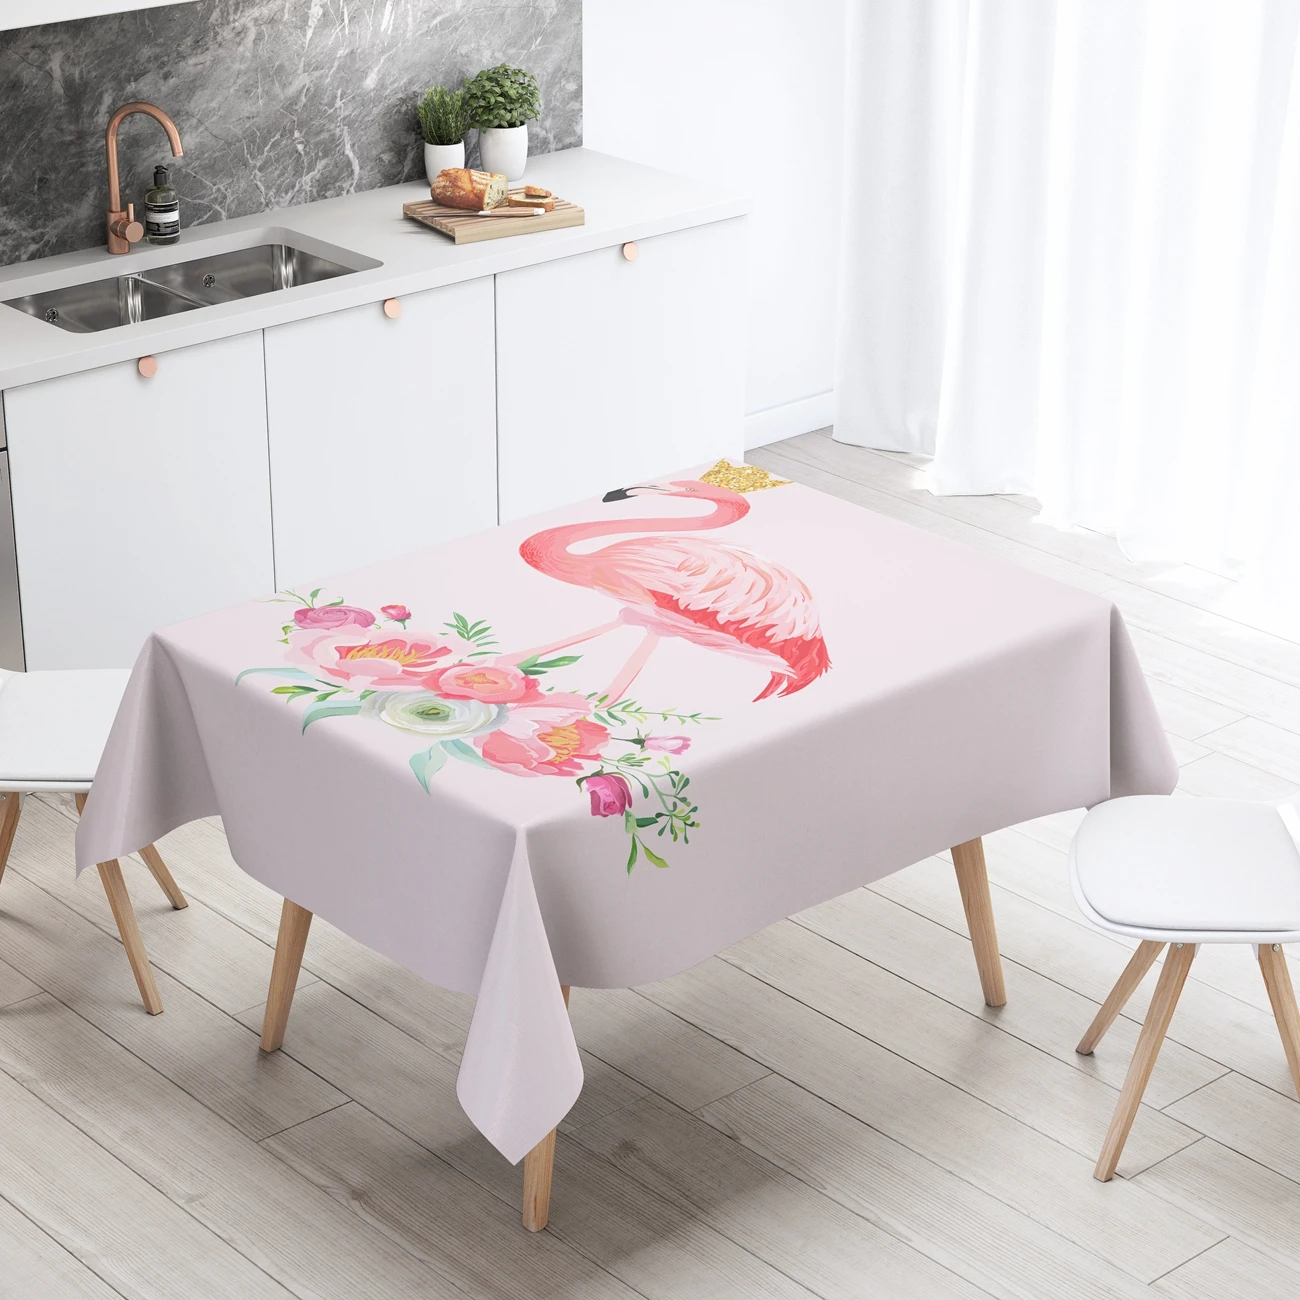 

Nordic Tablecloth for Flamingo Table Cloth Cover Decoration Waterproof Decor Dining Rectangular Anti-stain Kitchen Oilcloth